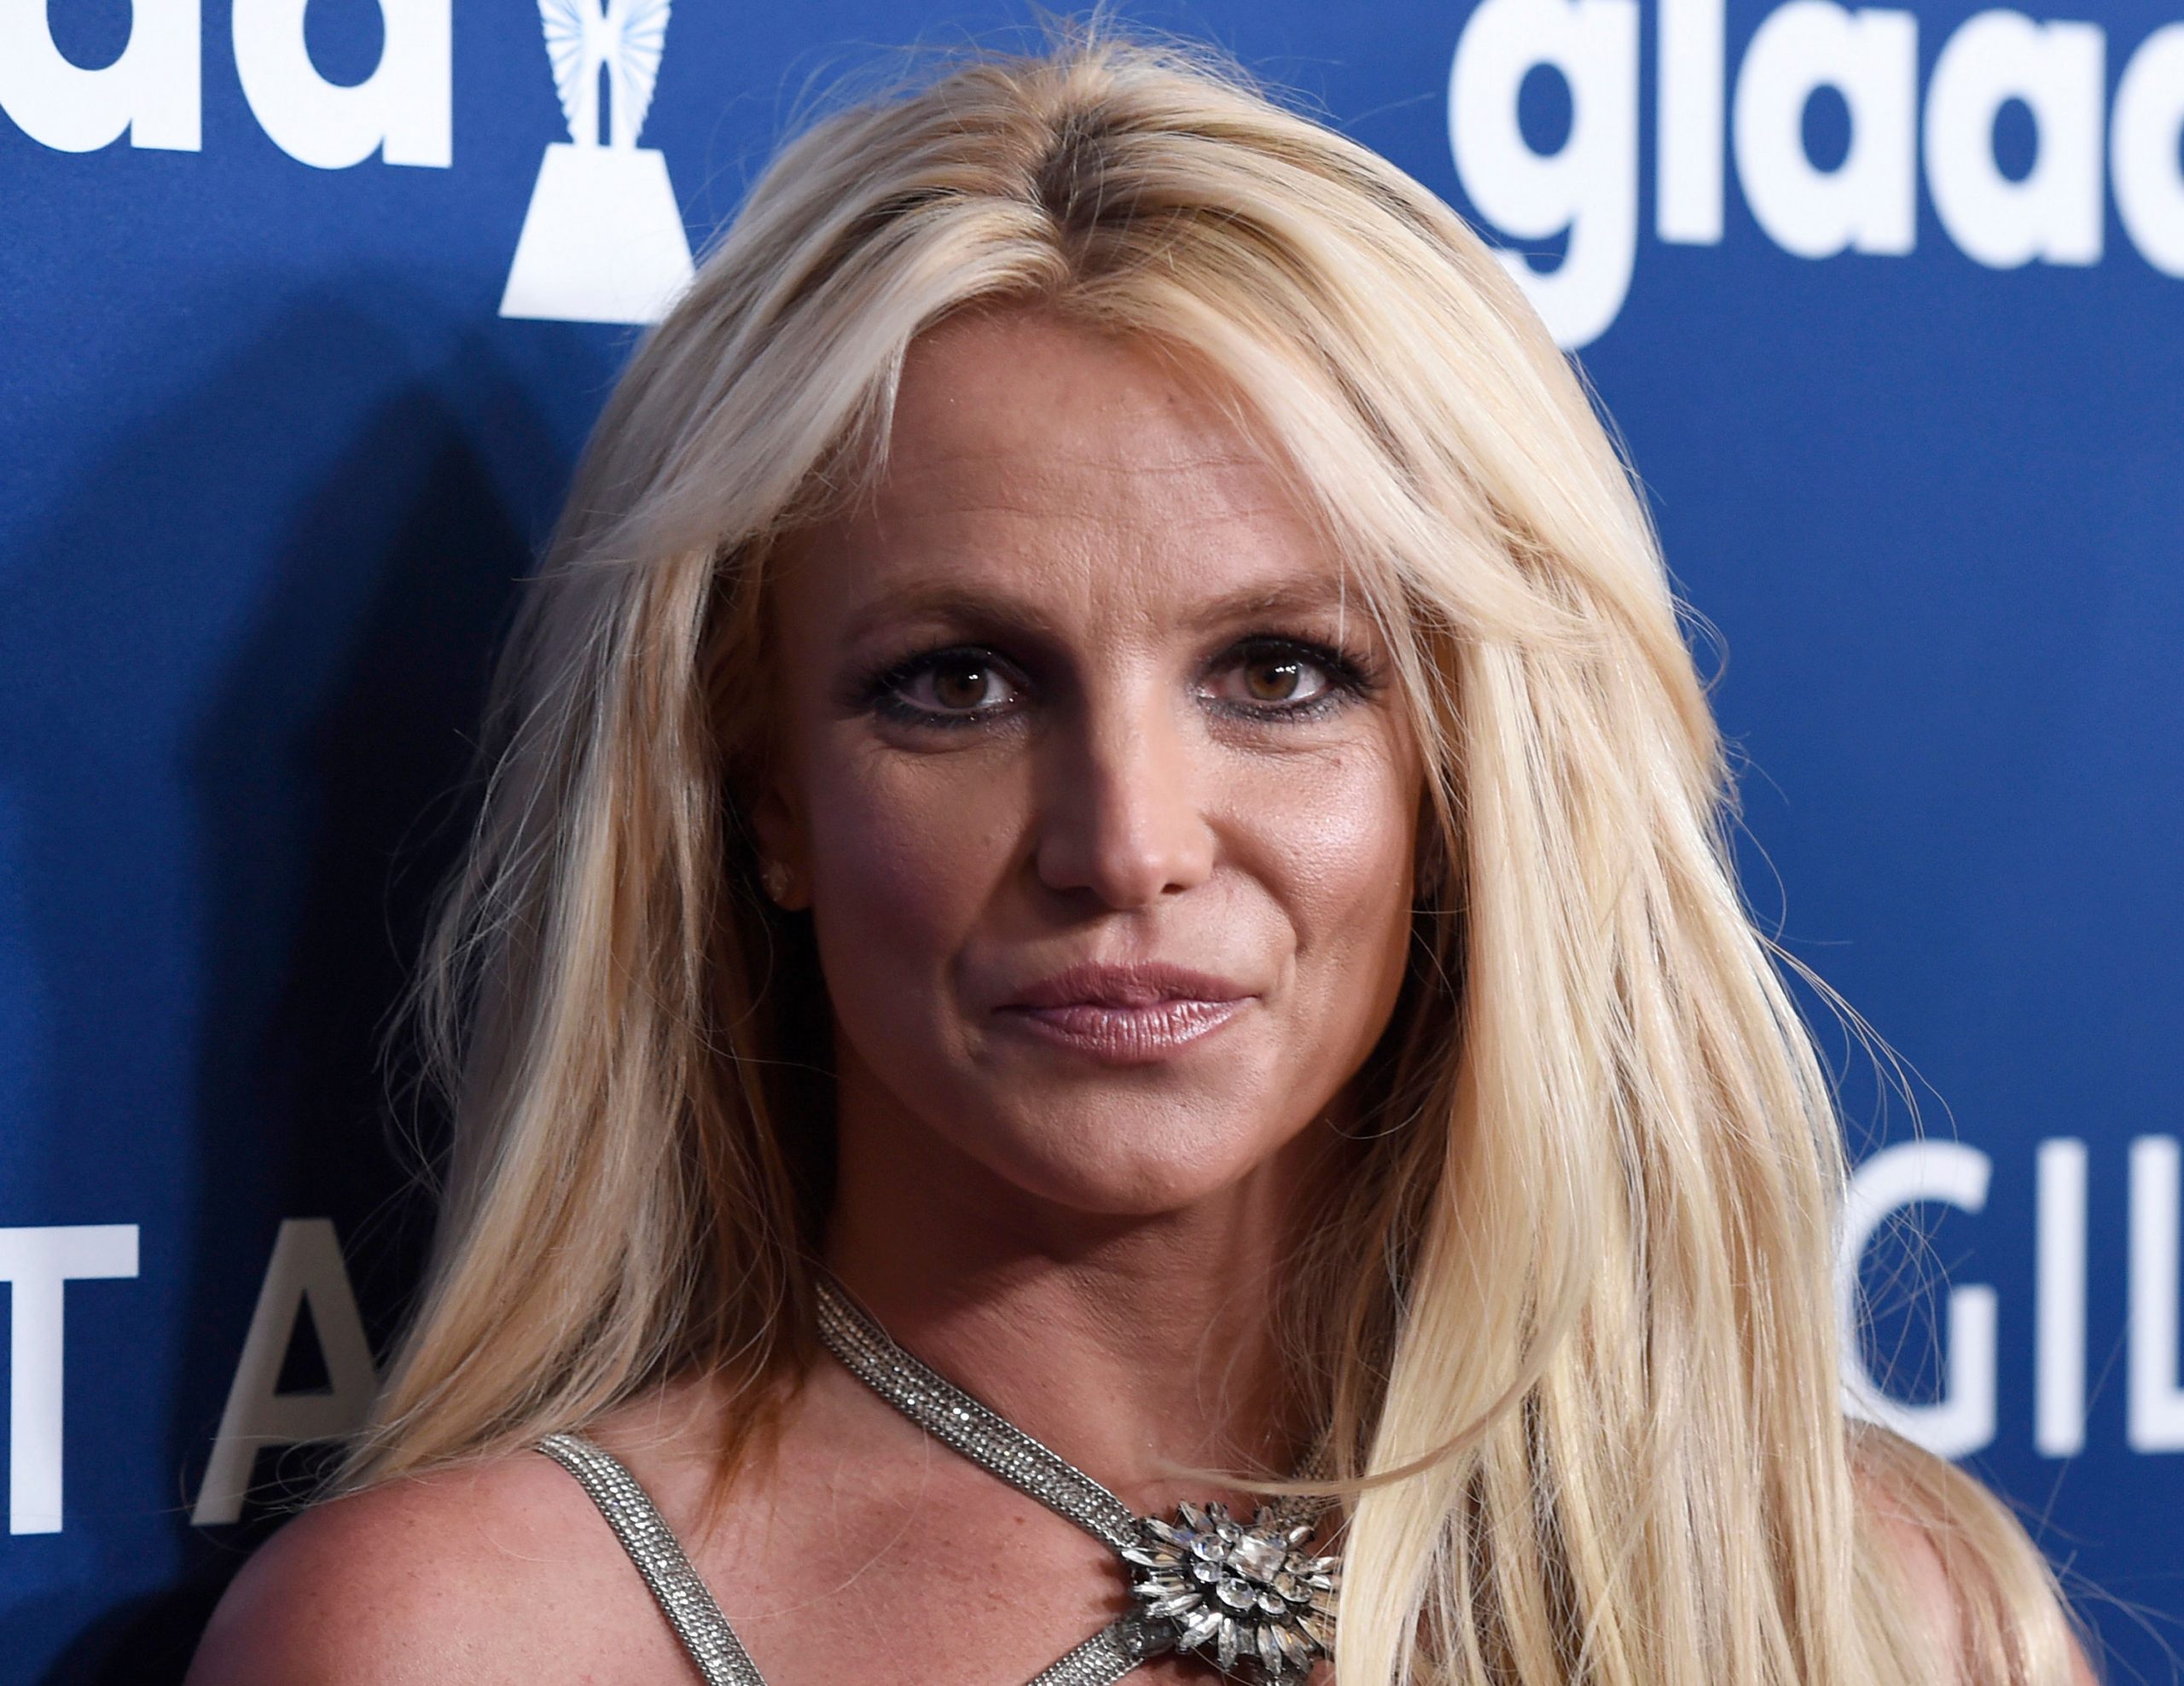 Security could watch me shower: Britney Spears on conservatorship